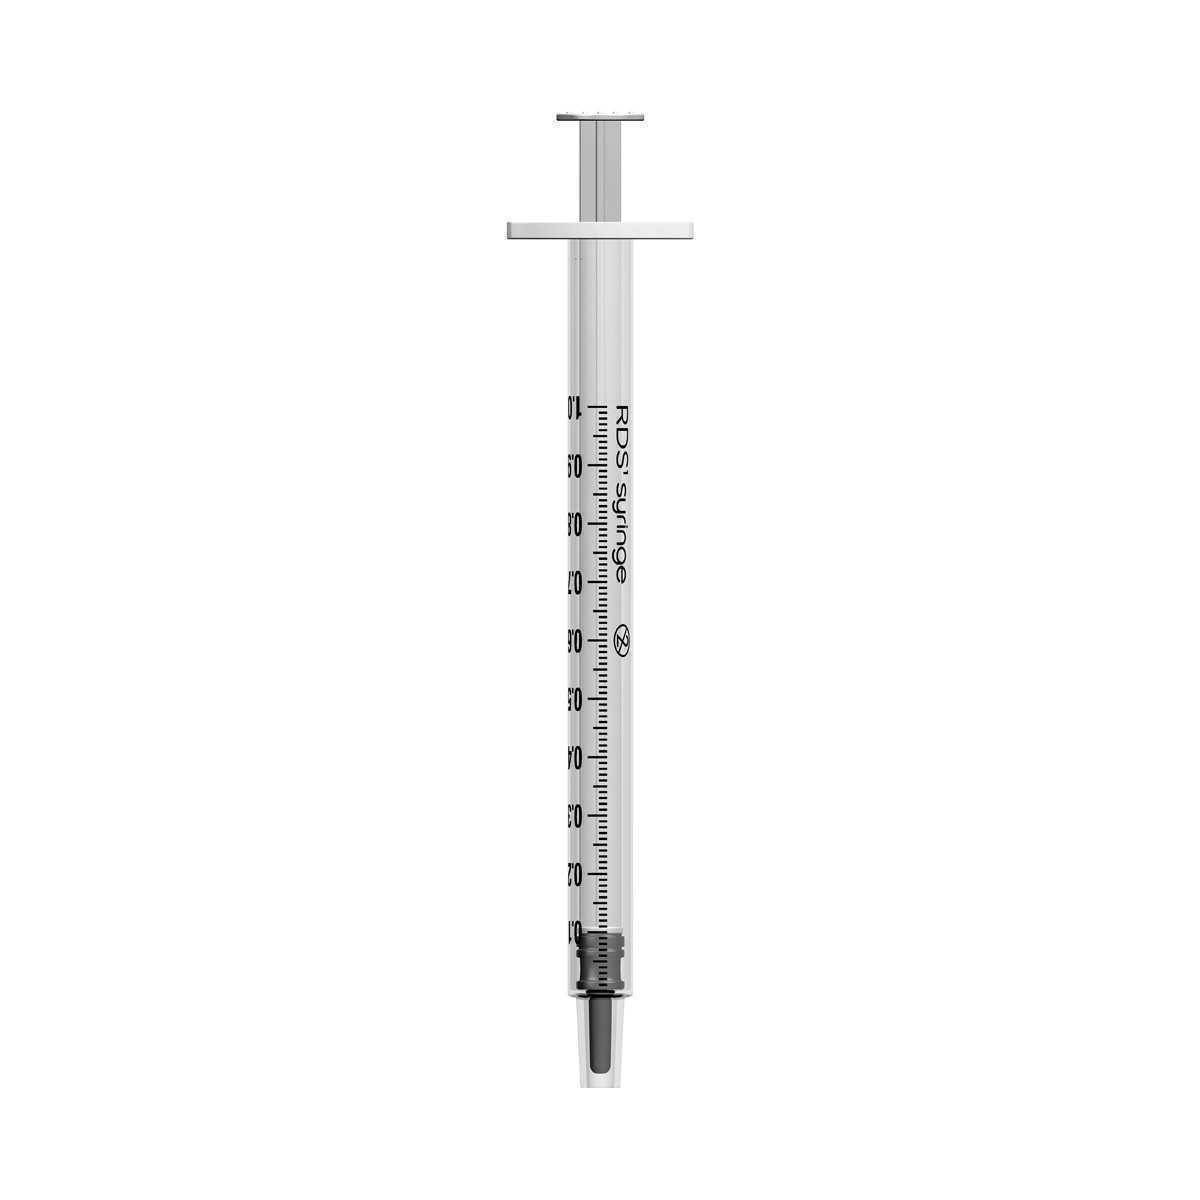 1ml Acuject Low Dead Space Syringes - UKMEDI